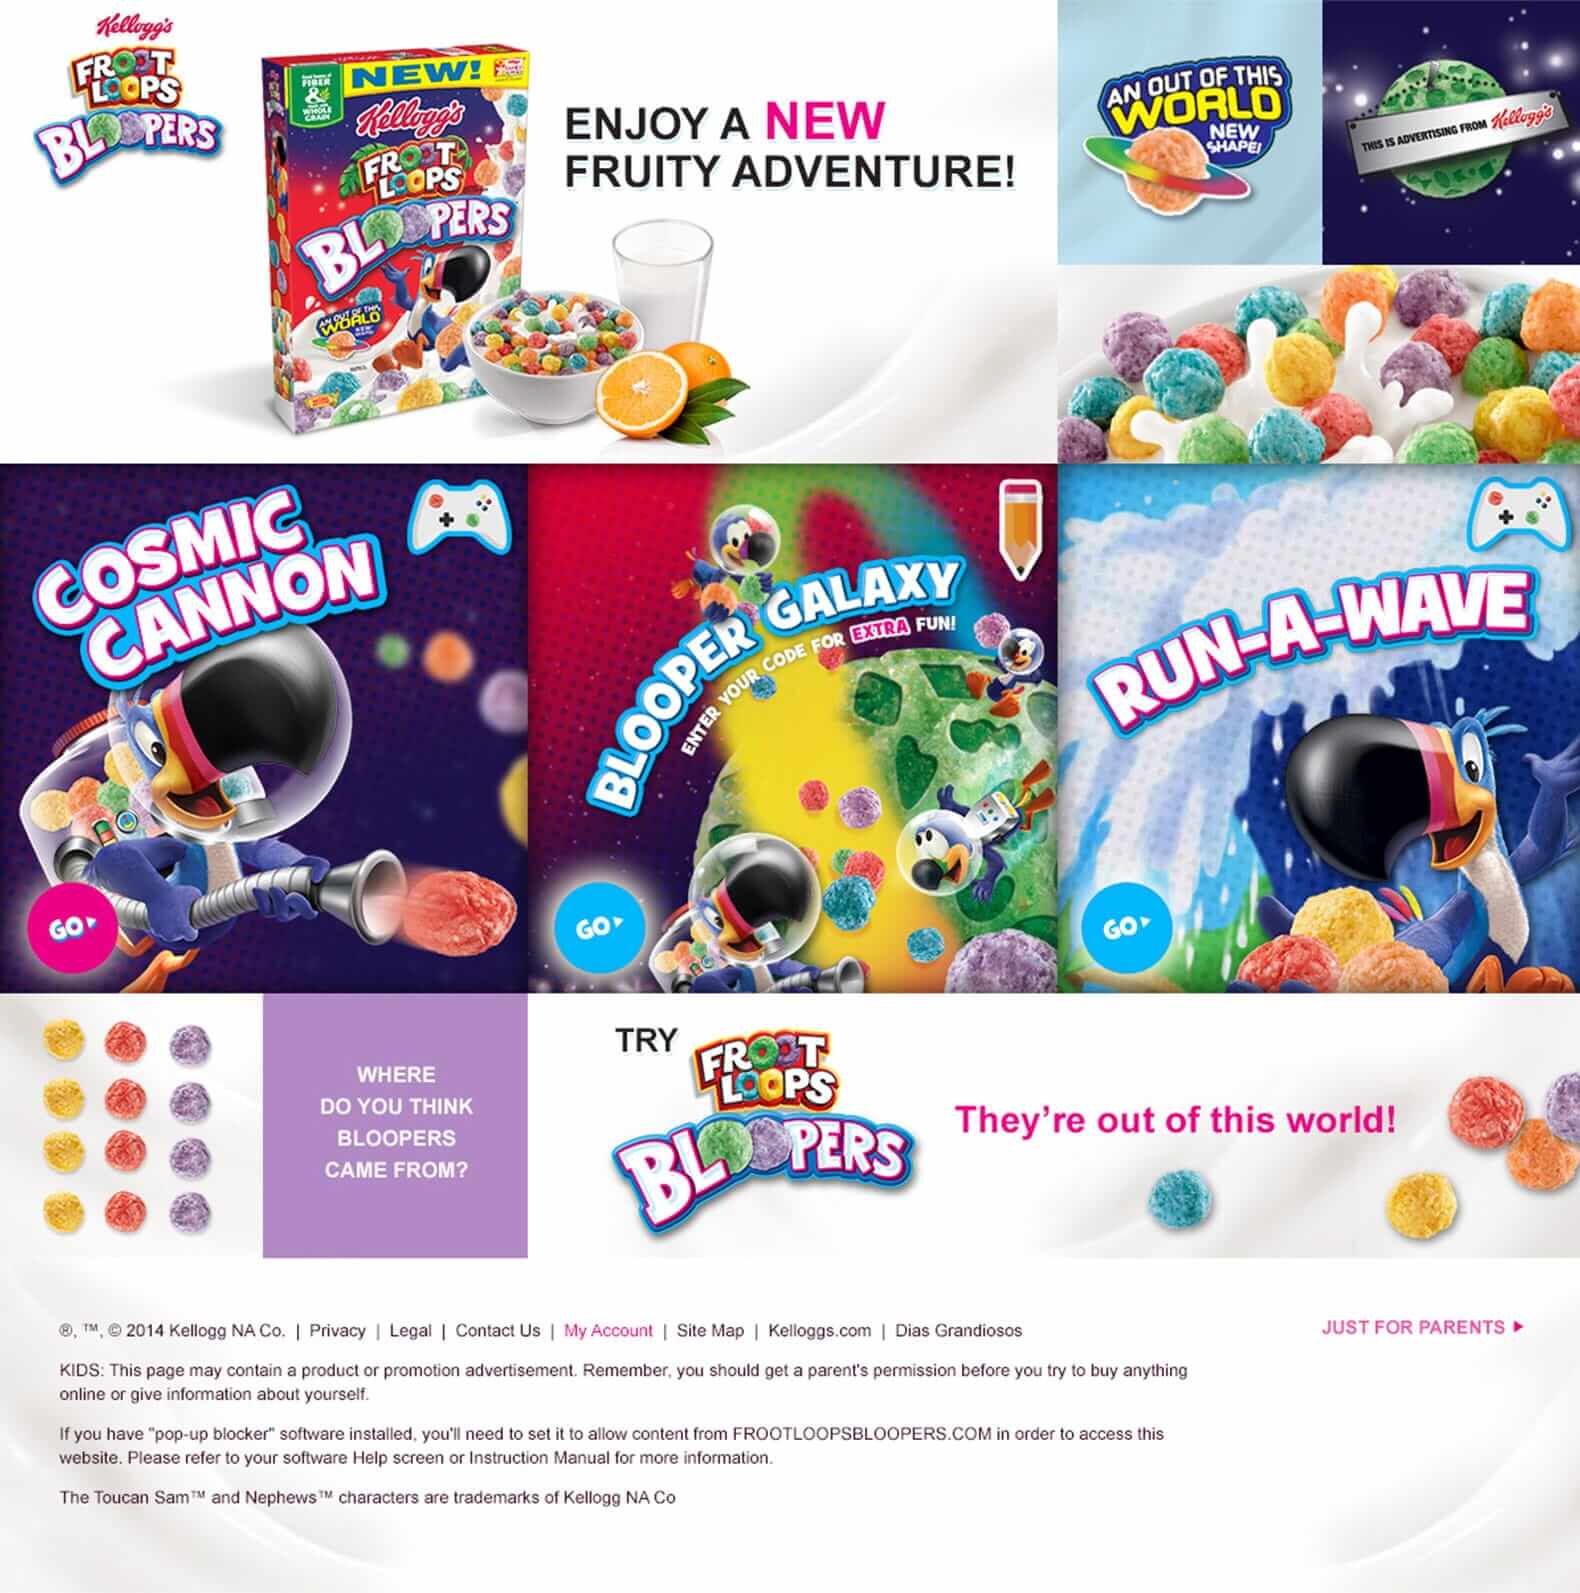 Froot Loops Bloopers Home page